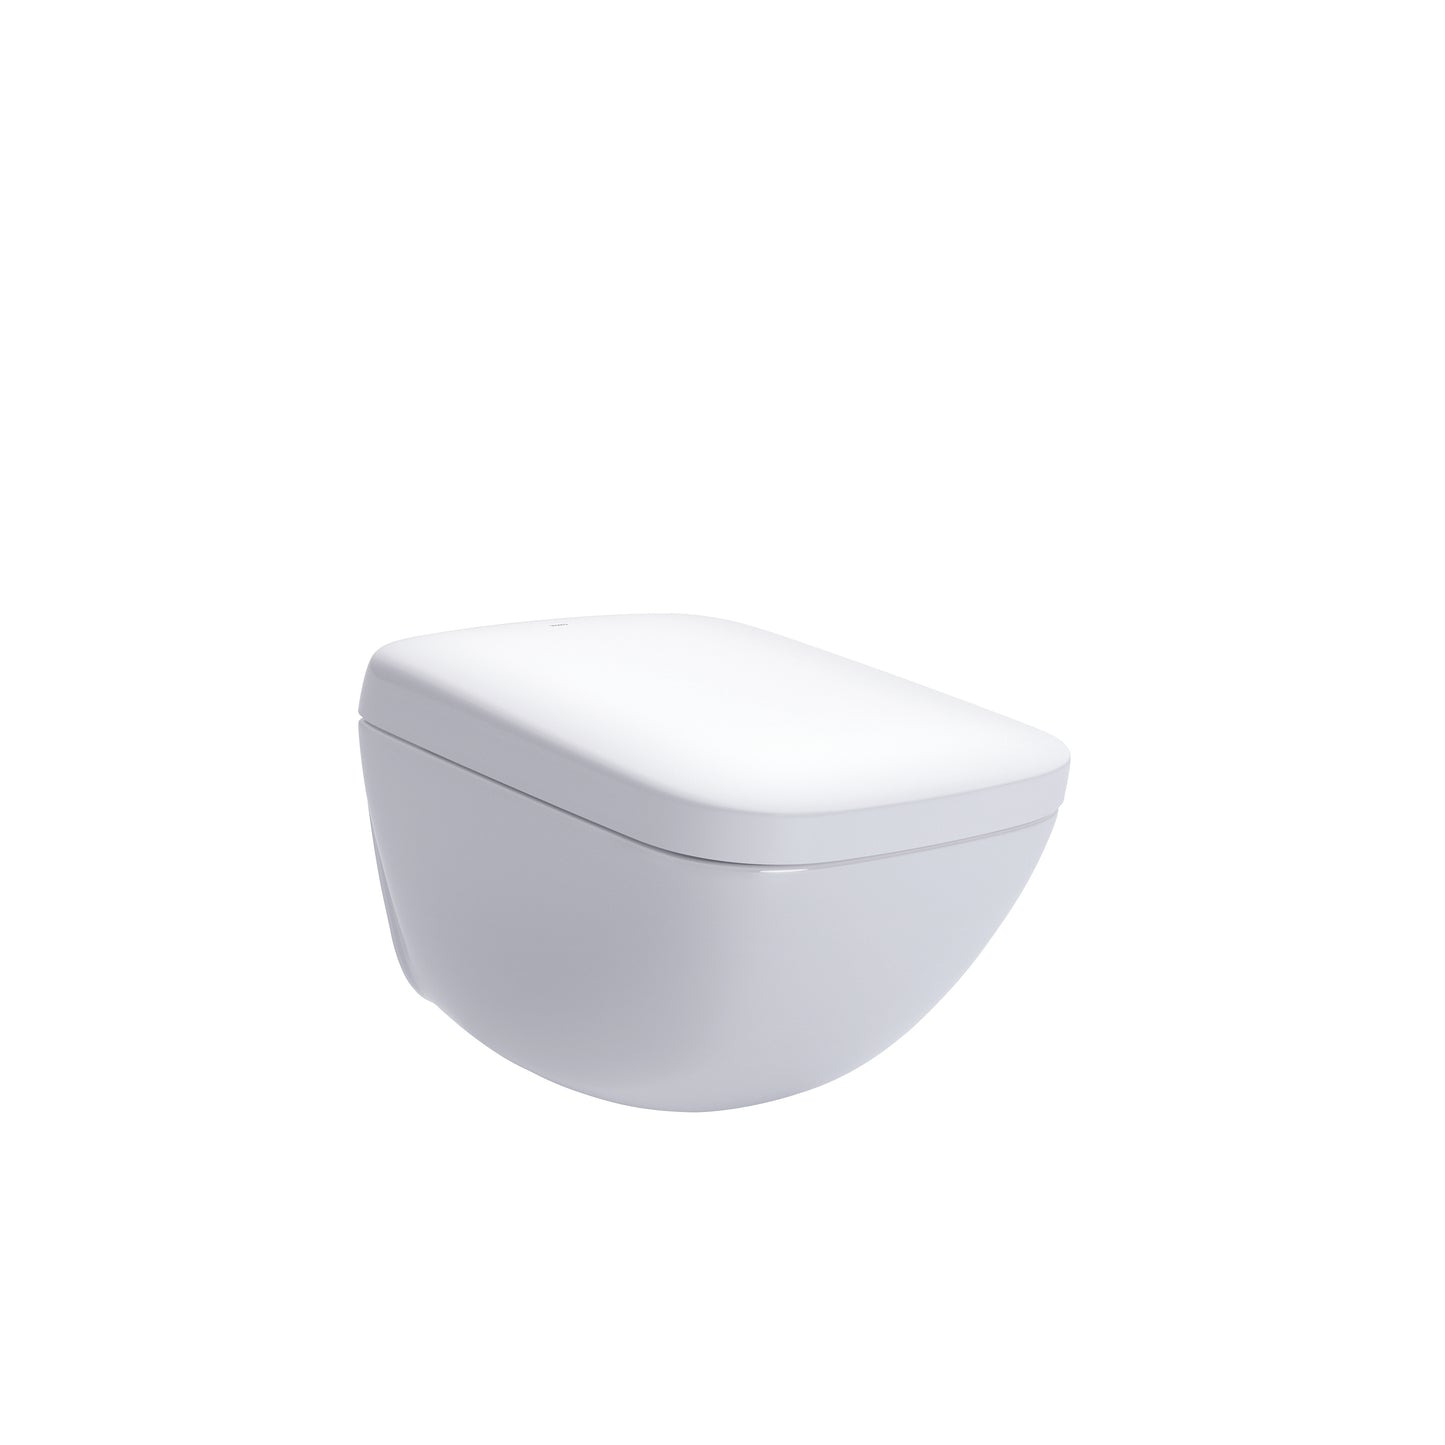 TOTO® NEOREST® WX1™ Dual Flush 1.2 or 0.8 GPF Wall-Hung Toilet with Integrated Bidet Seat and eWater+®, Cotton White - CWT9538CEMFG#01